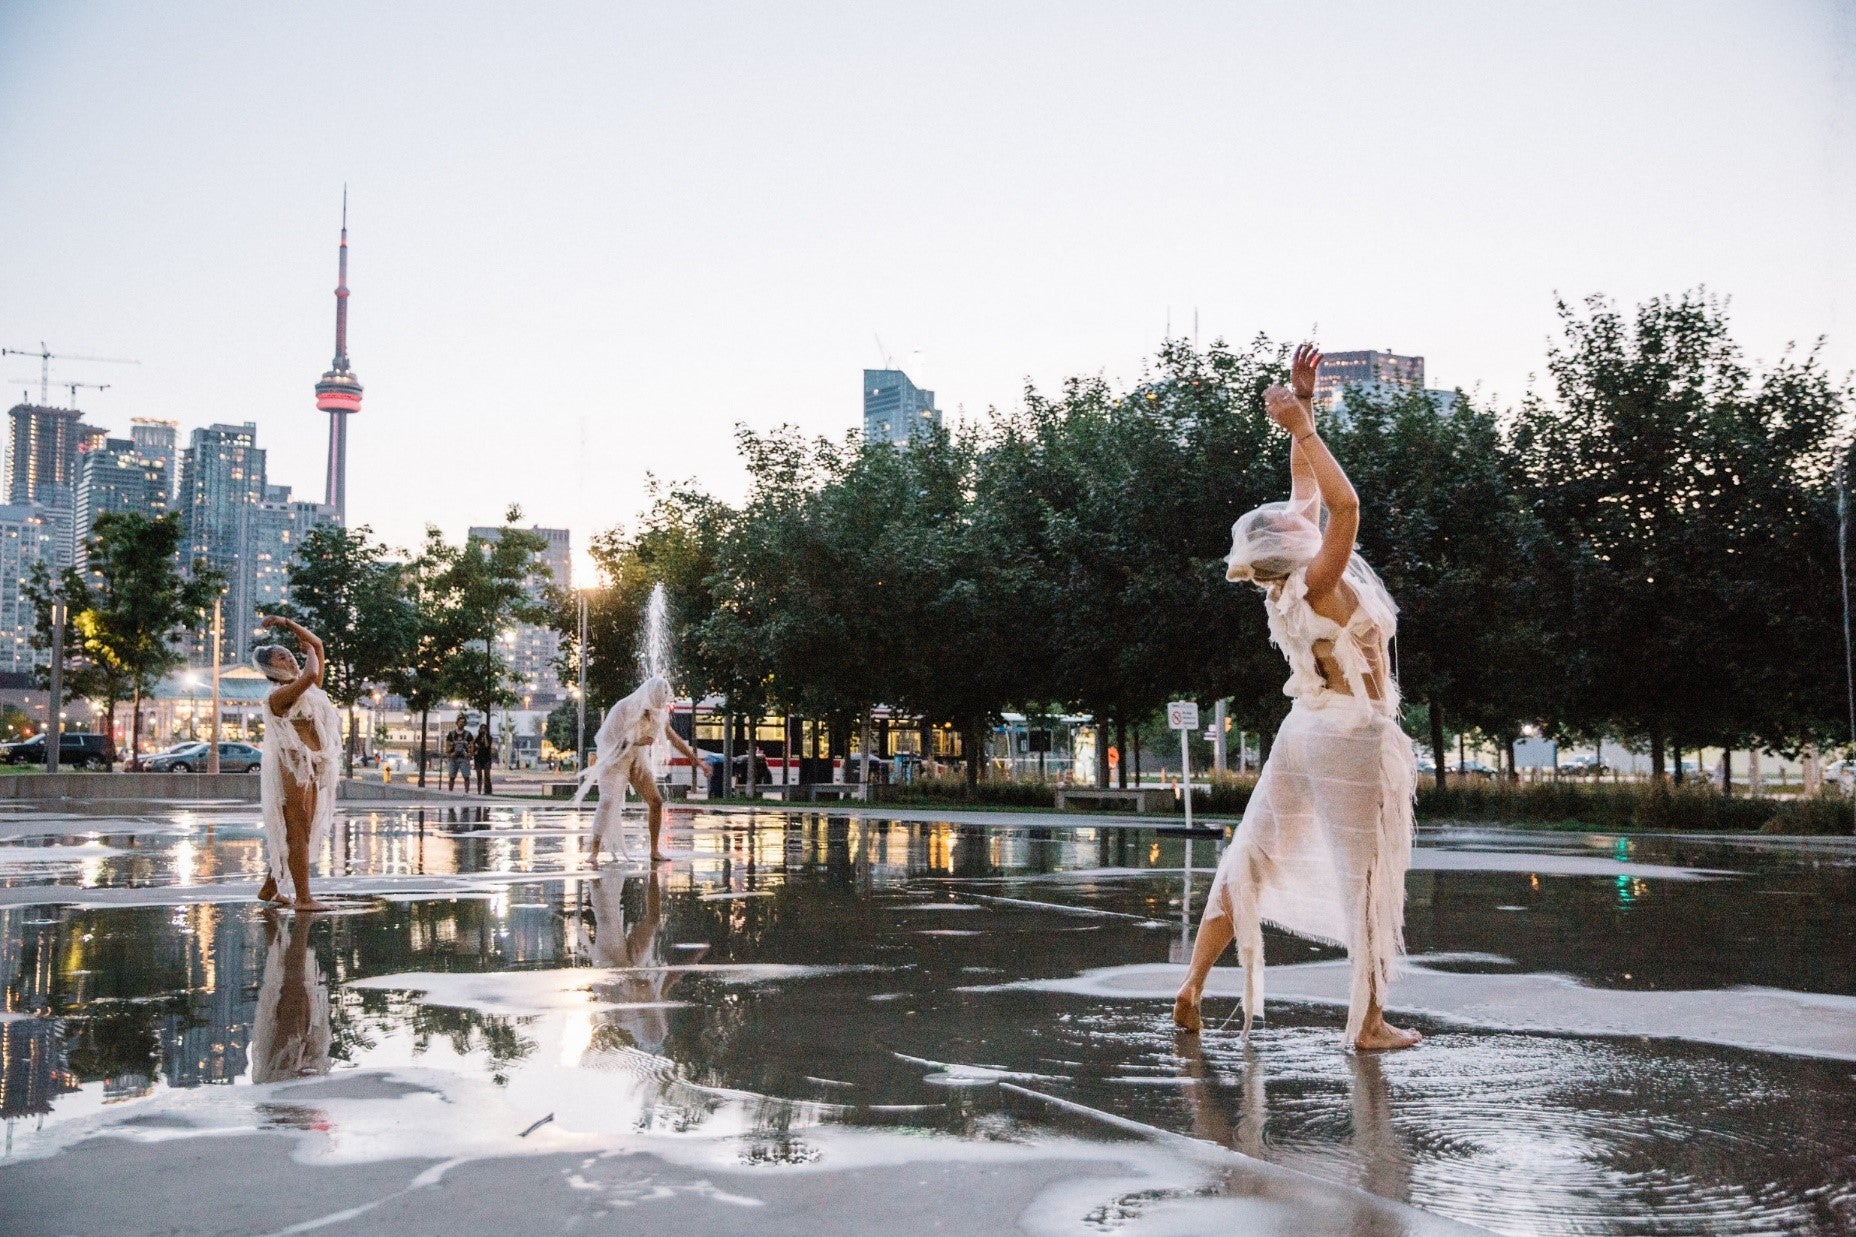 Irene Cortes, Mary-Dora Bloch Hansen and Zach Olesinski performed this ecstatic dance as part of The Gata: Water Ceremony at Sherbourne Common.